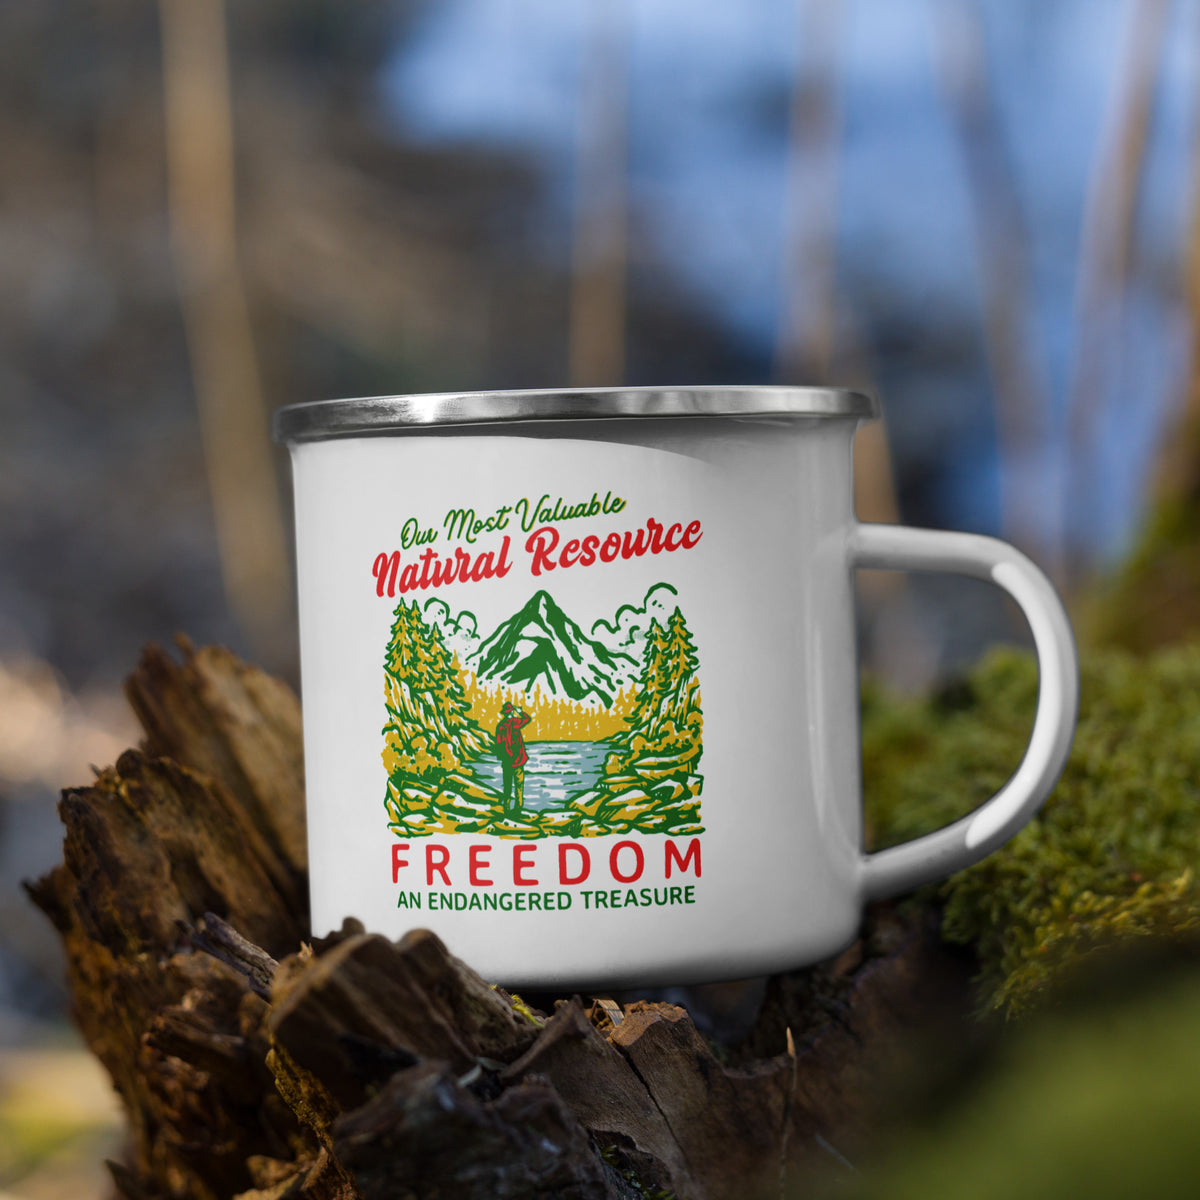 Our Most Valuable Natural Resource Freedom Enamel Mug